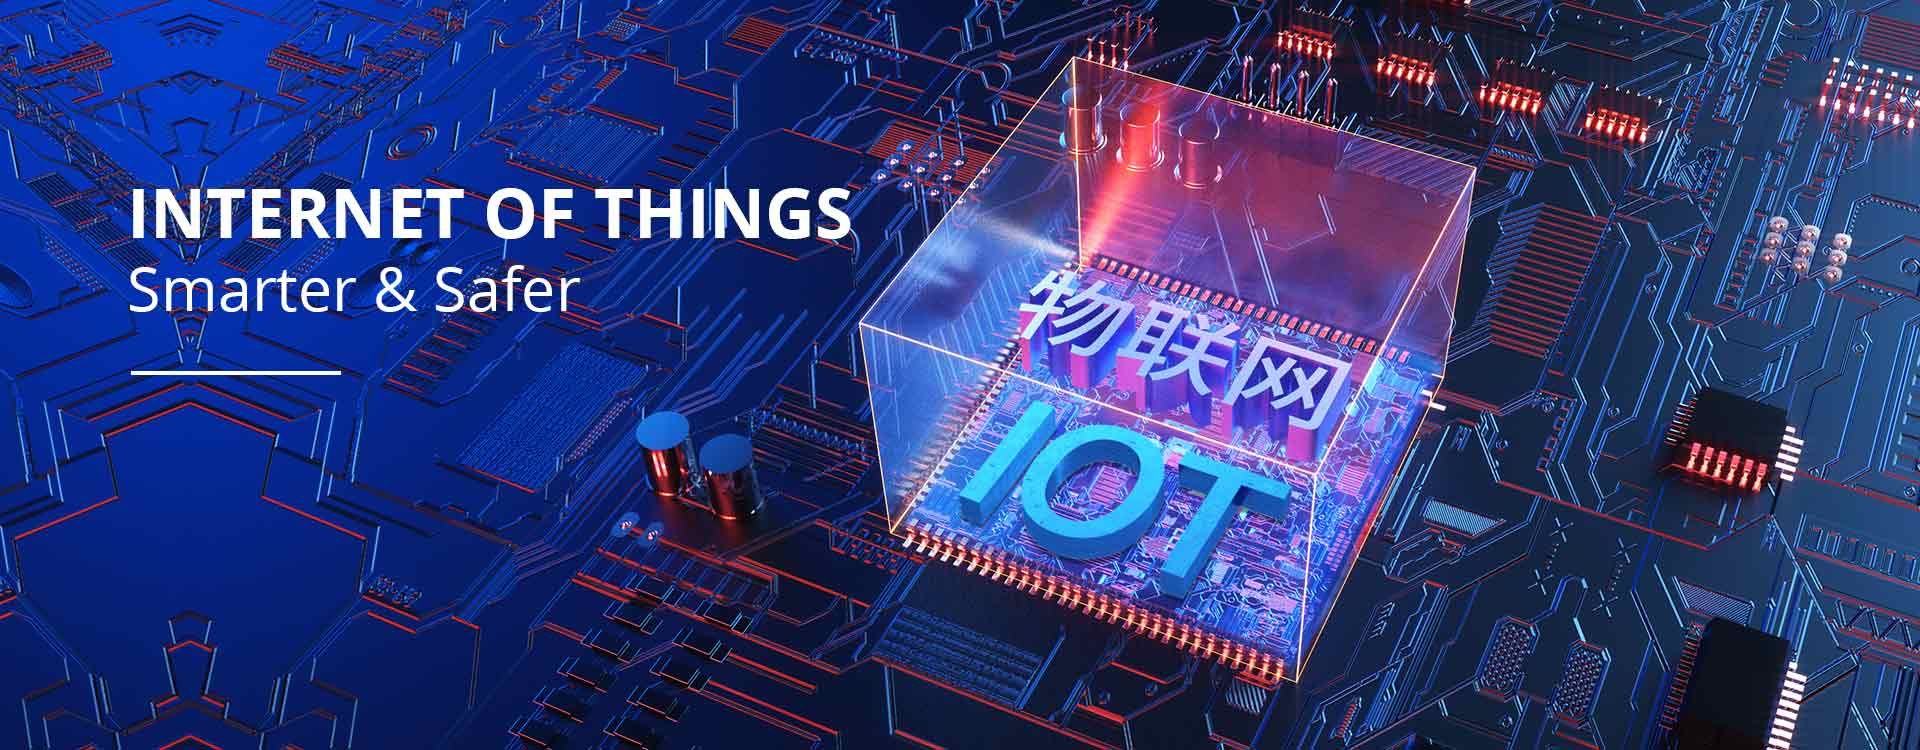 IoT, Internet of Things, Smarter & Safer